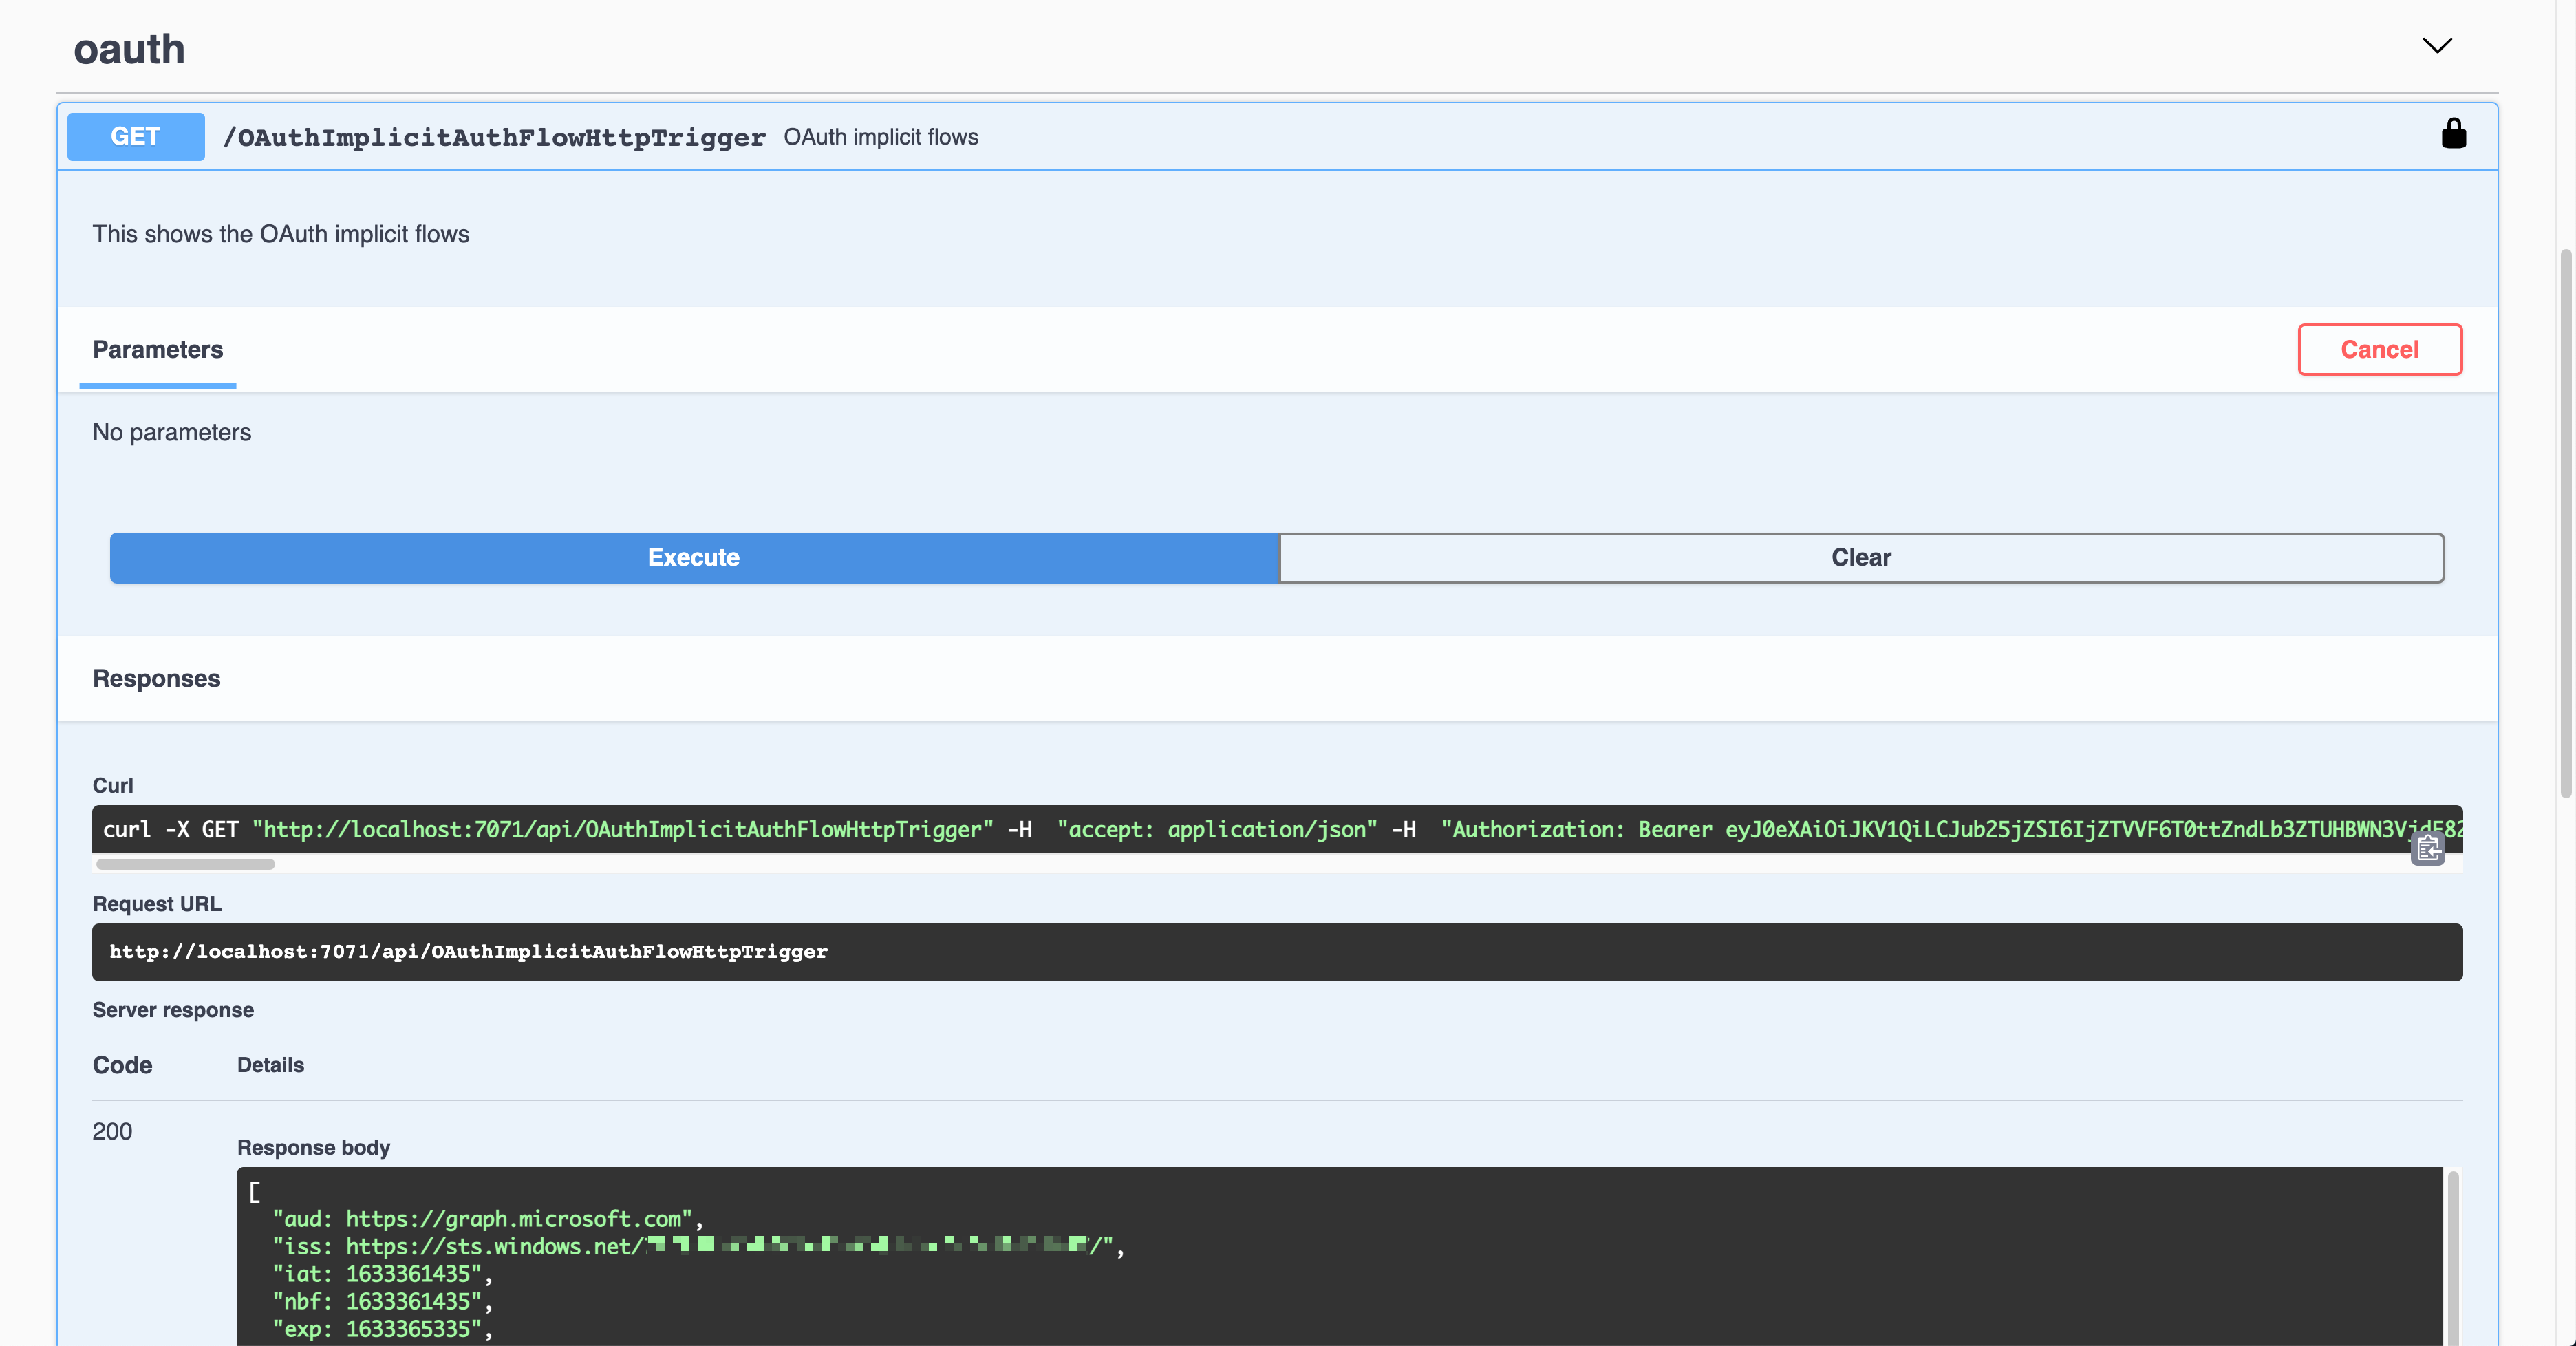 Swagger UI - OAuth2 Implicit Auth - Result